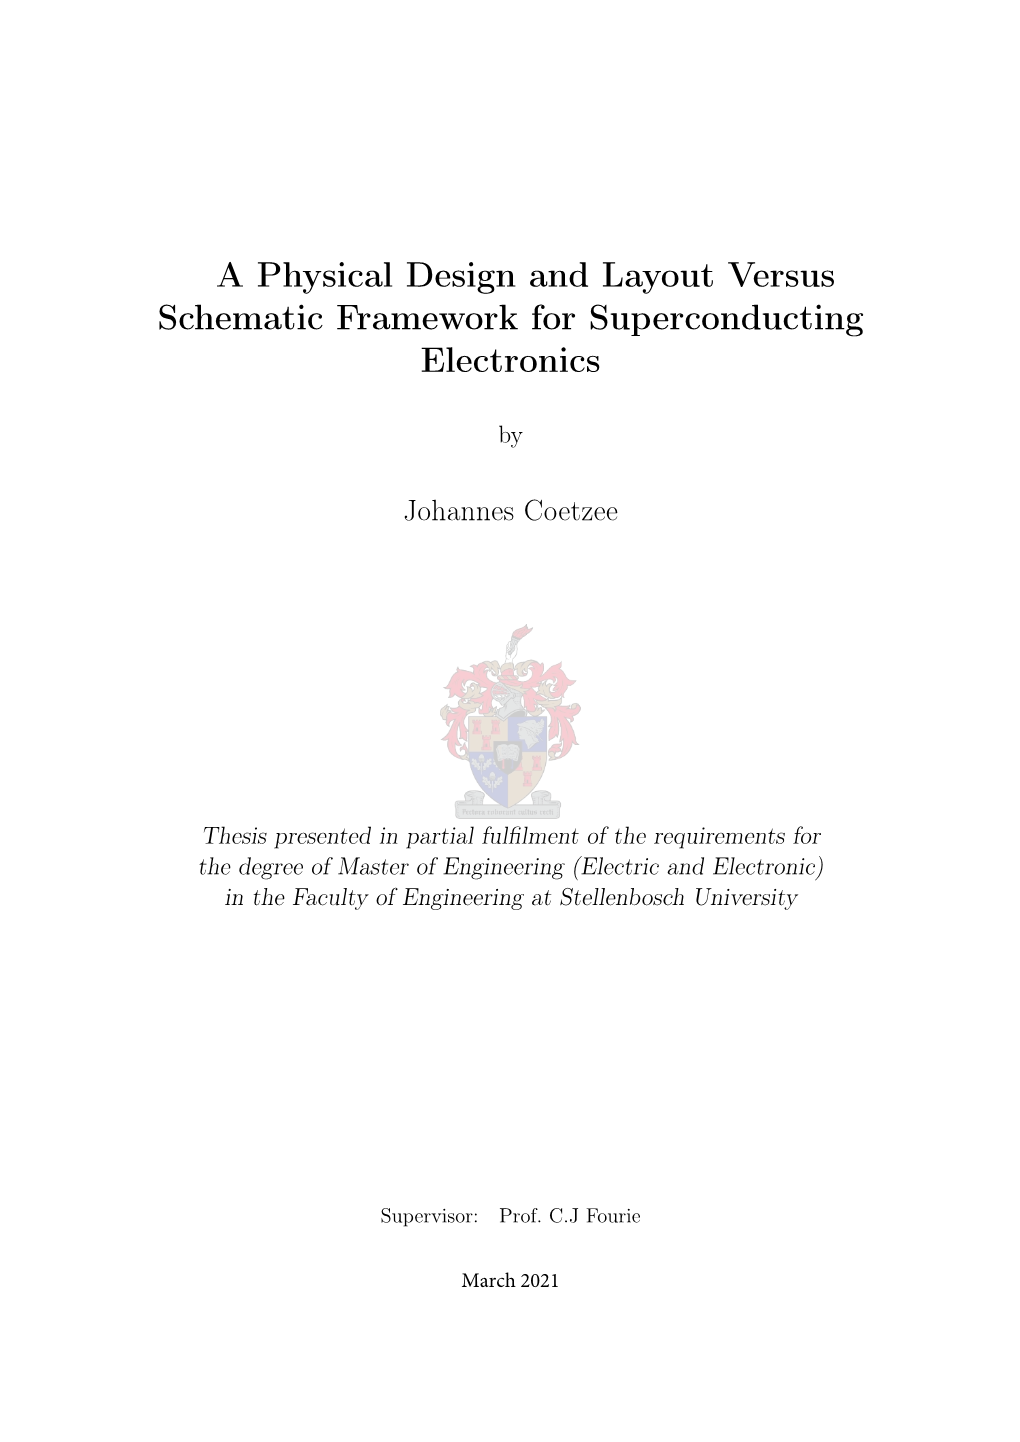 A Physical Design and Layout Versus Schematic Framework for Superconducting Electronics